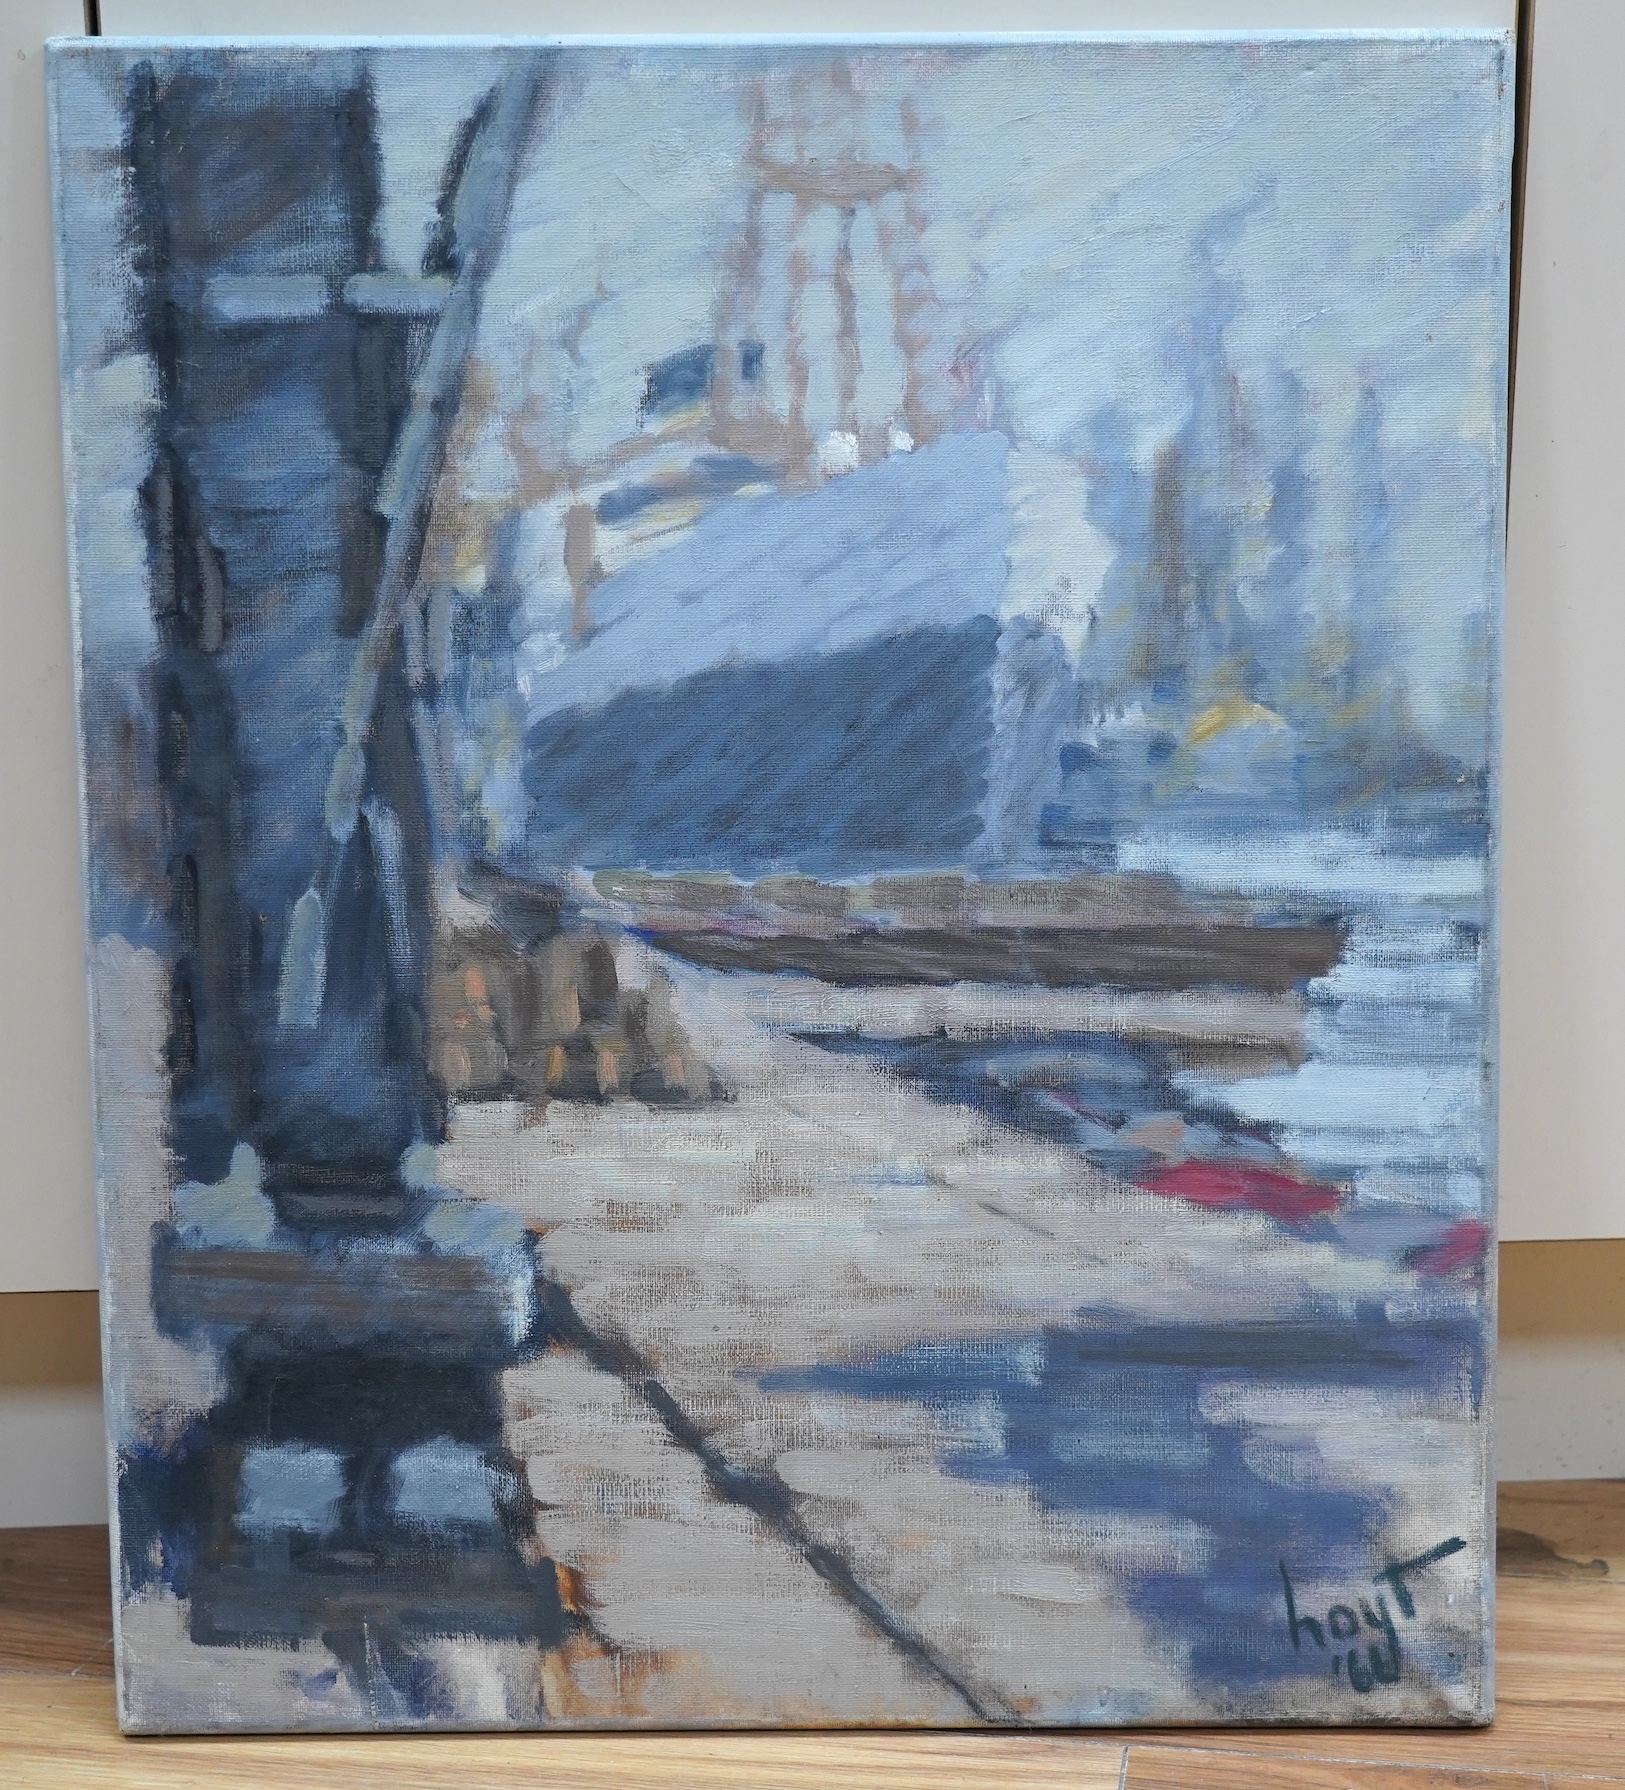 Hoyt (20/21st. C), oil on canvas, Dockland scene with ship, signed and dated '66, 61 x 51cm, unframed. Condition - fair-good